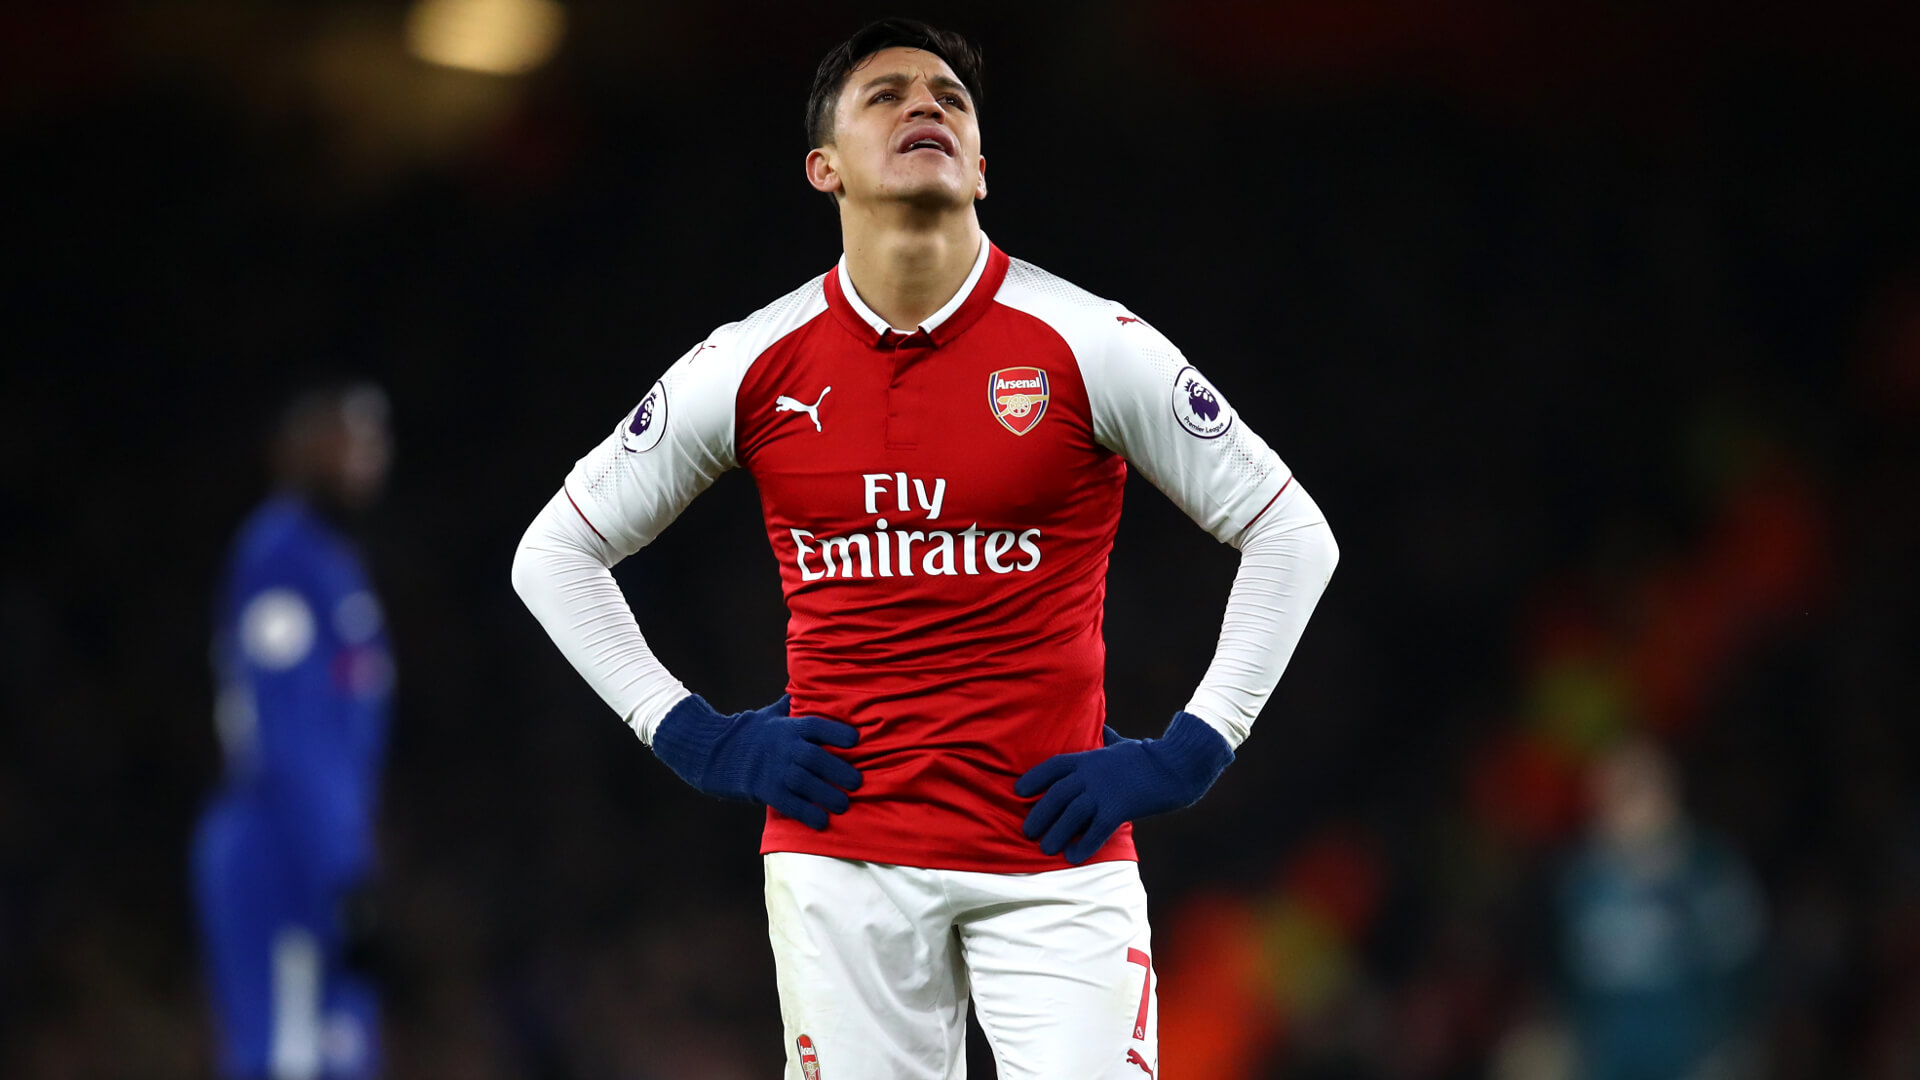 Sanchez is the highest earner in the epl